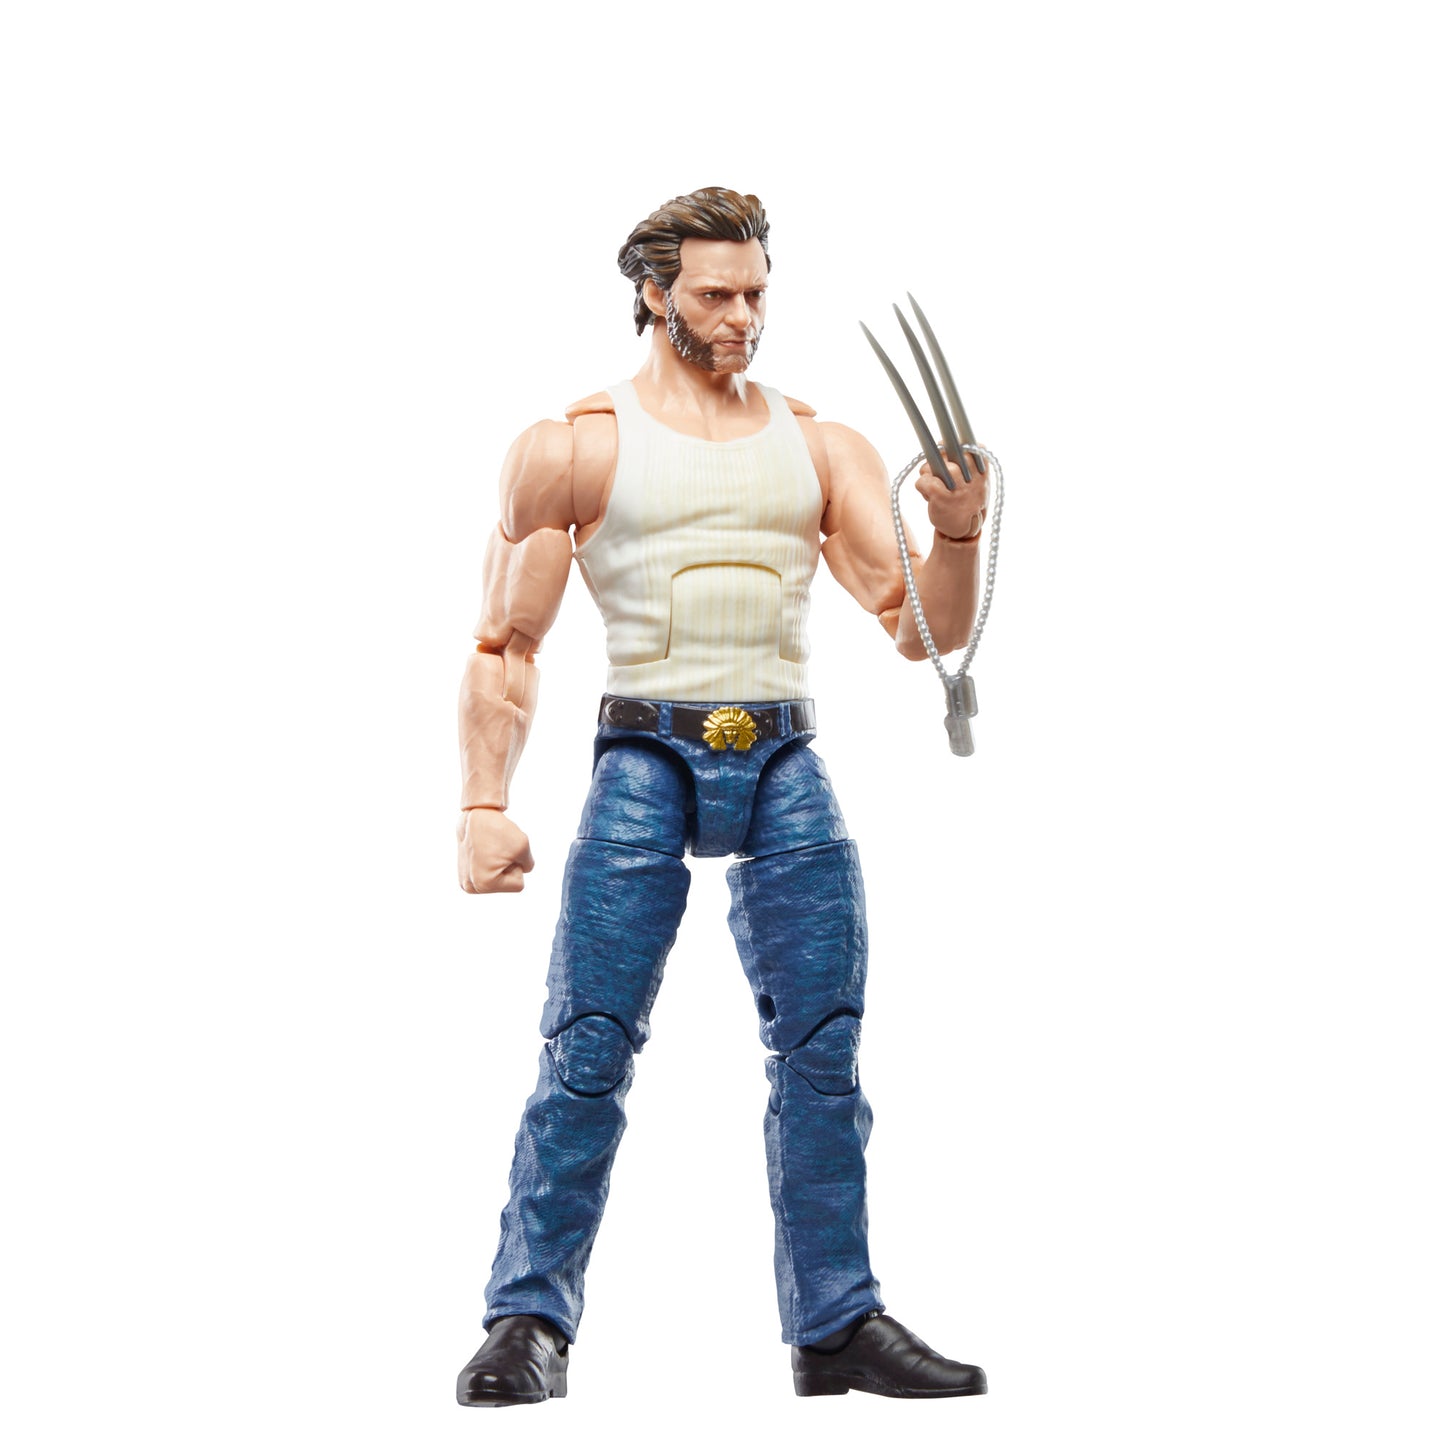 [PRE-ORDER] Marvel Legends Series Wolverine, Deadpool 2 Adult Collectible 6 Inch Action Figure